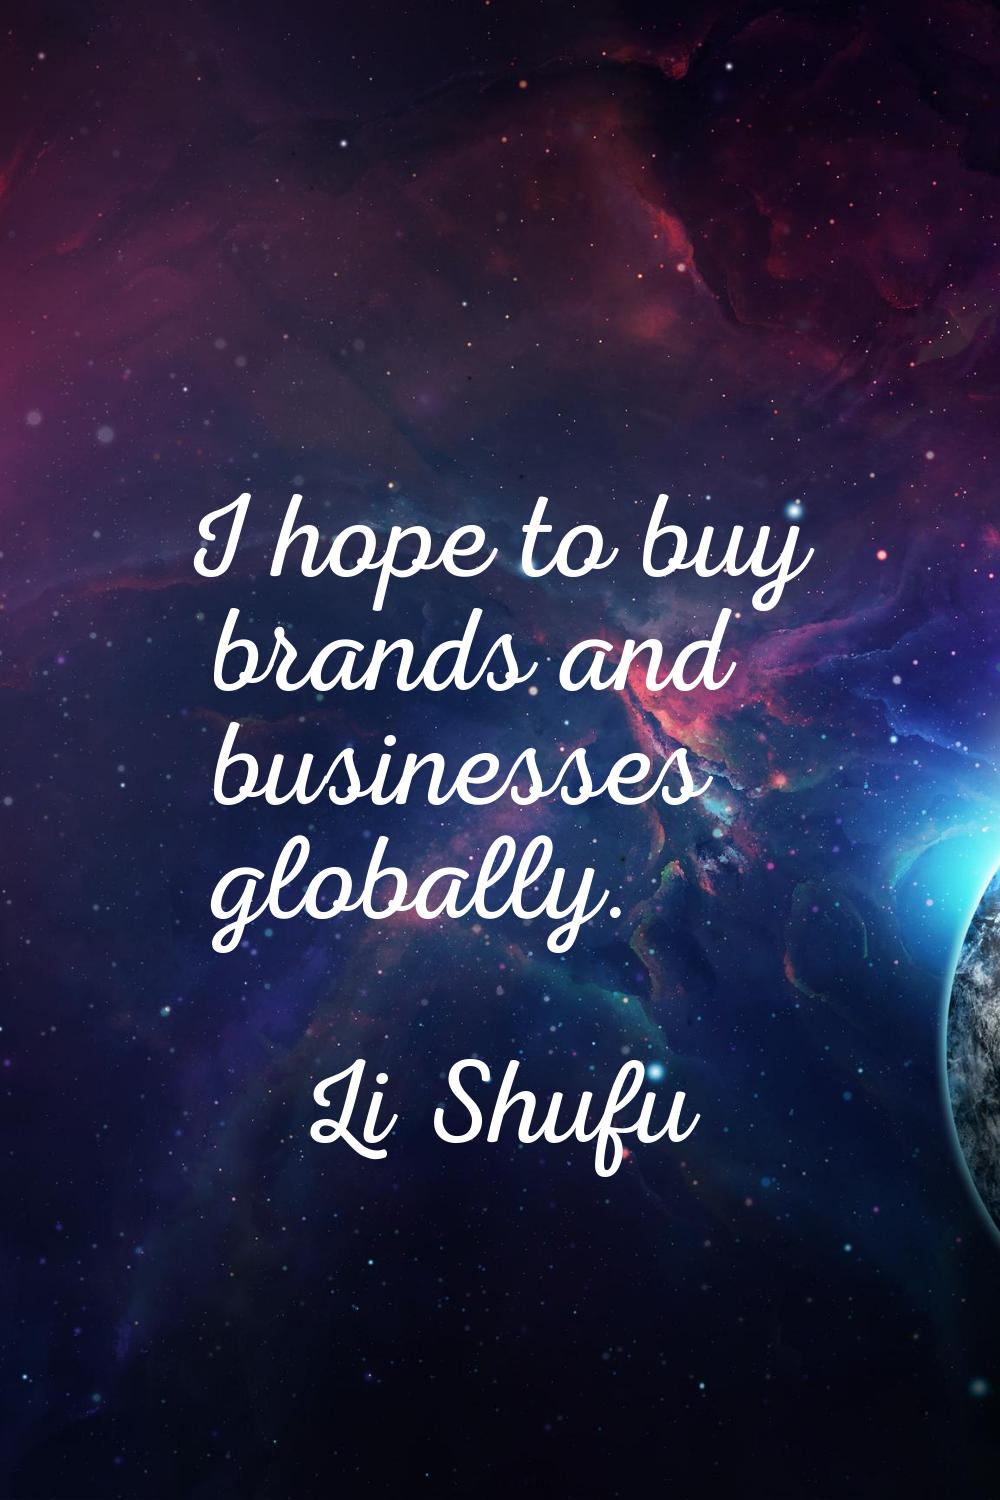 I hope to buy brands and businesses globally.